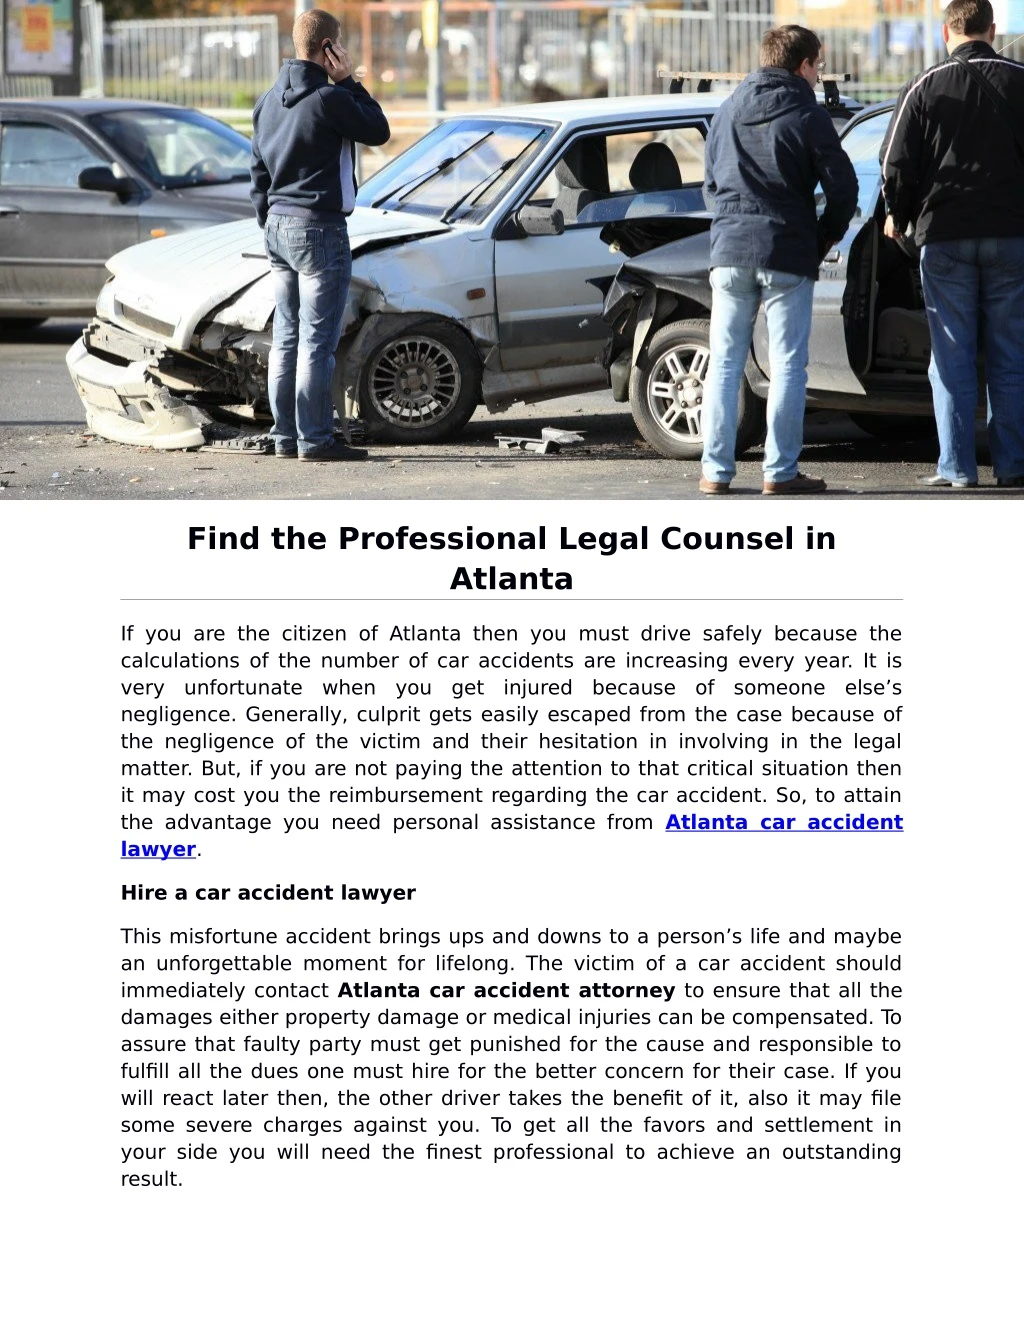 find the professional legal counsel in atlanta